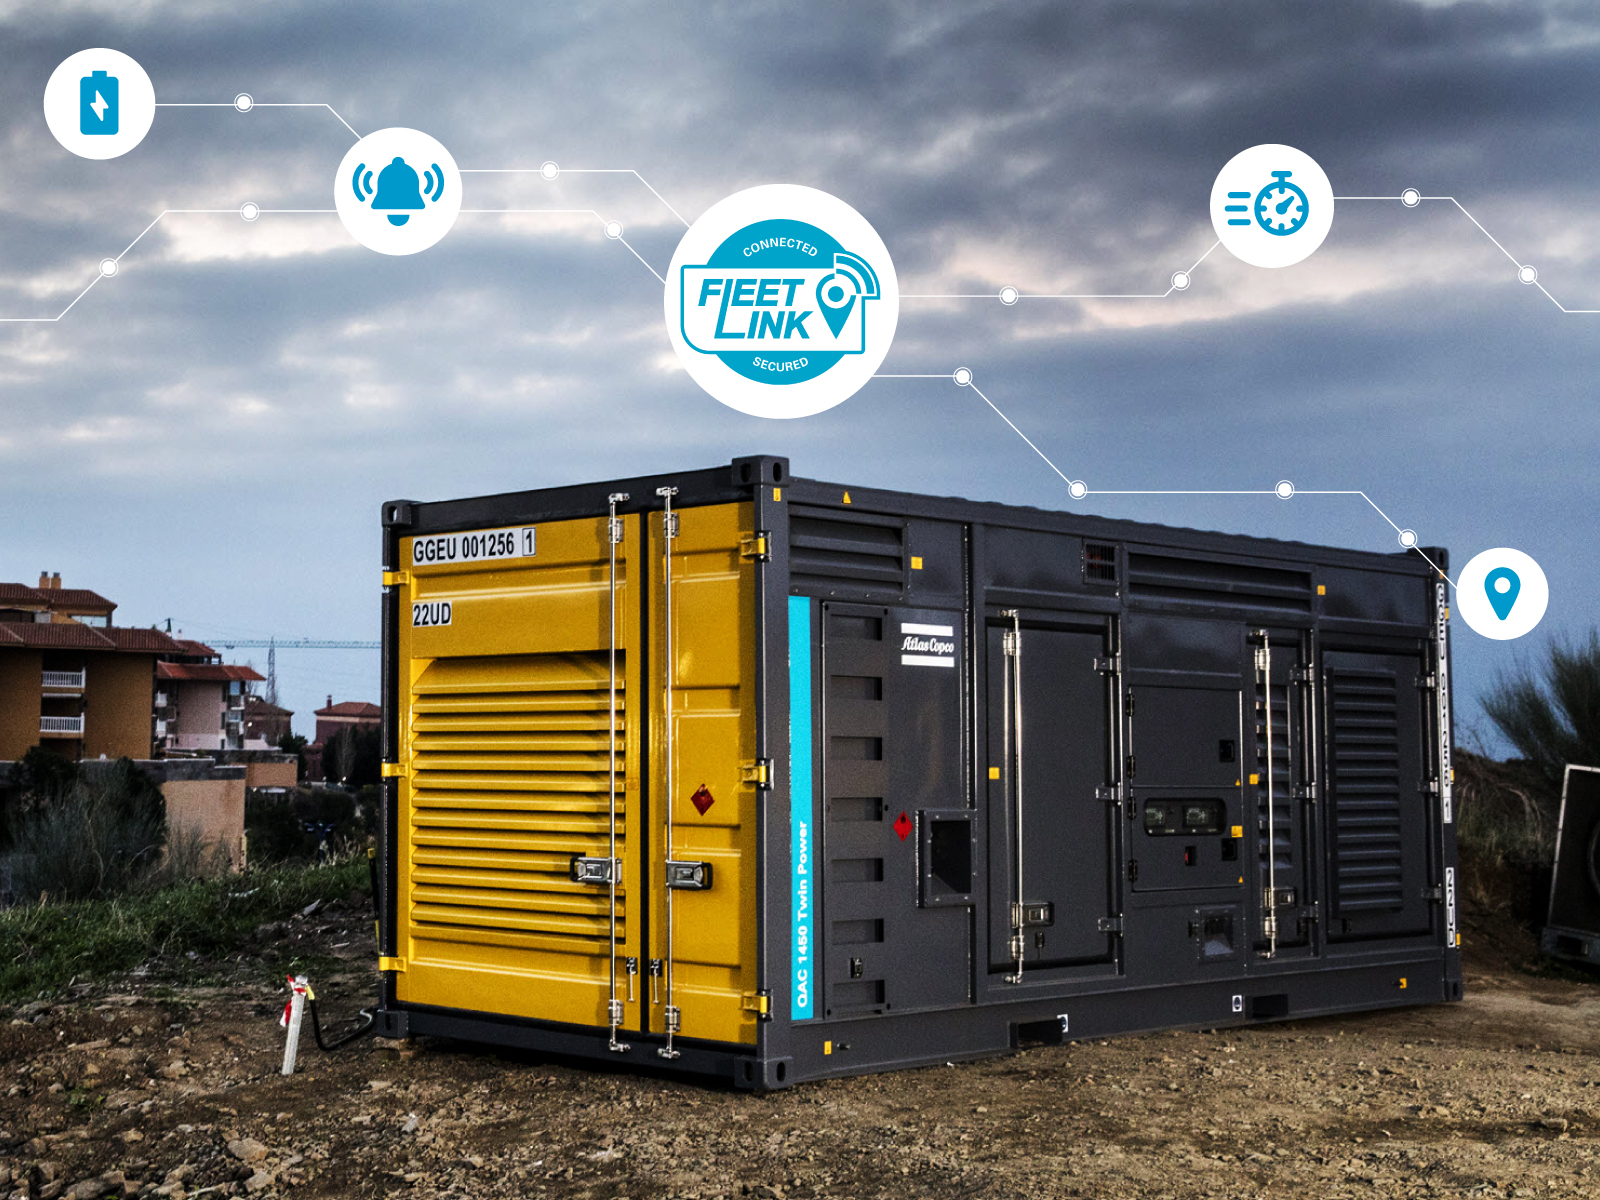 Atlas Copco’s online solutions enable customers to make the smart connection